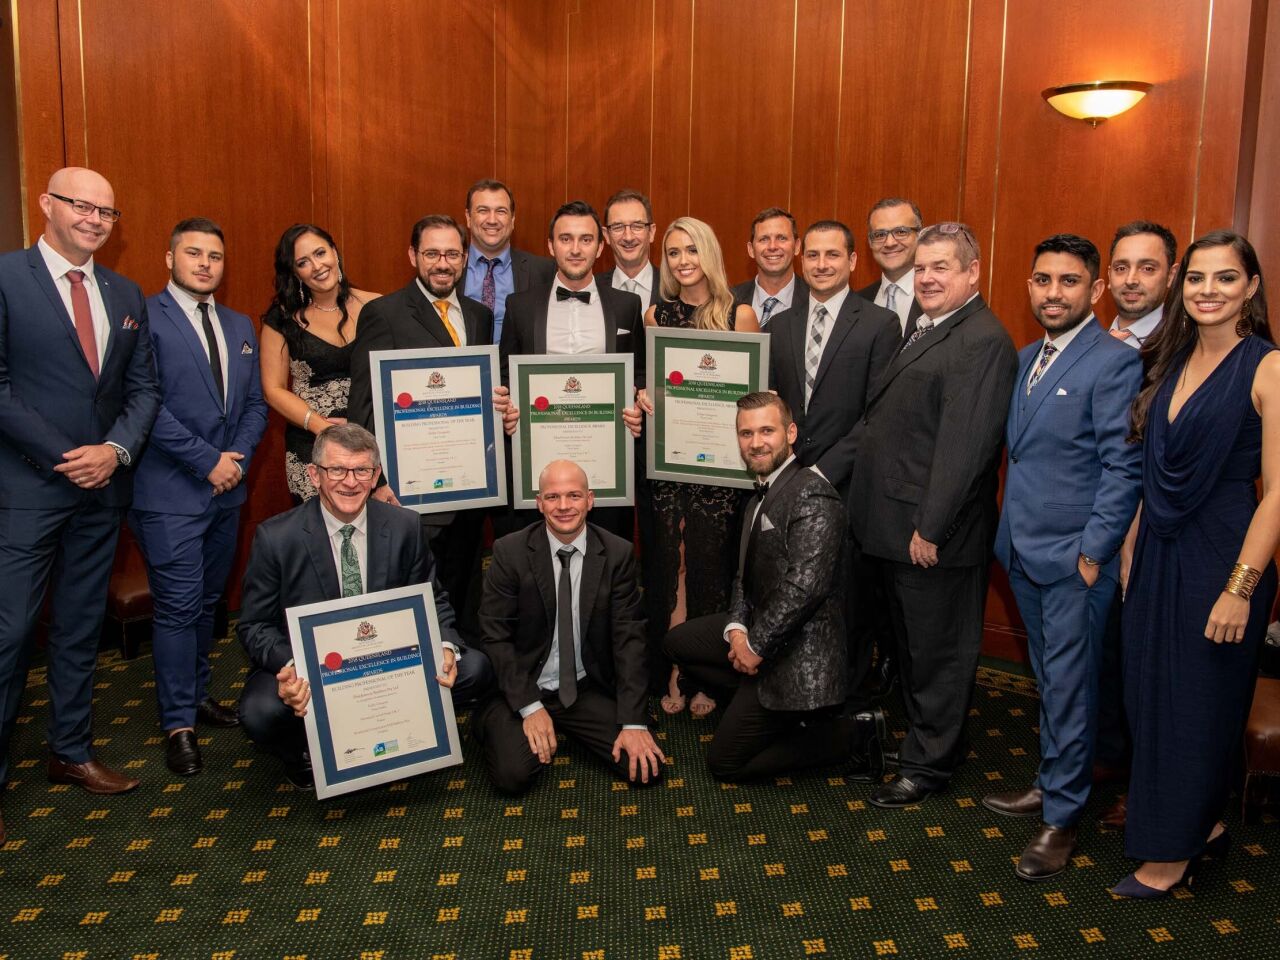 Team Eddie Gangemi for Queensland Building Professional of the Year & High Commendation for Residential Construction $100M+ for Newstead Central Stages 2 & 3